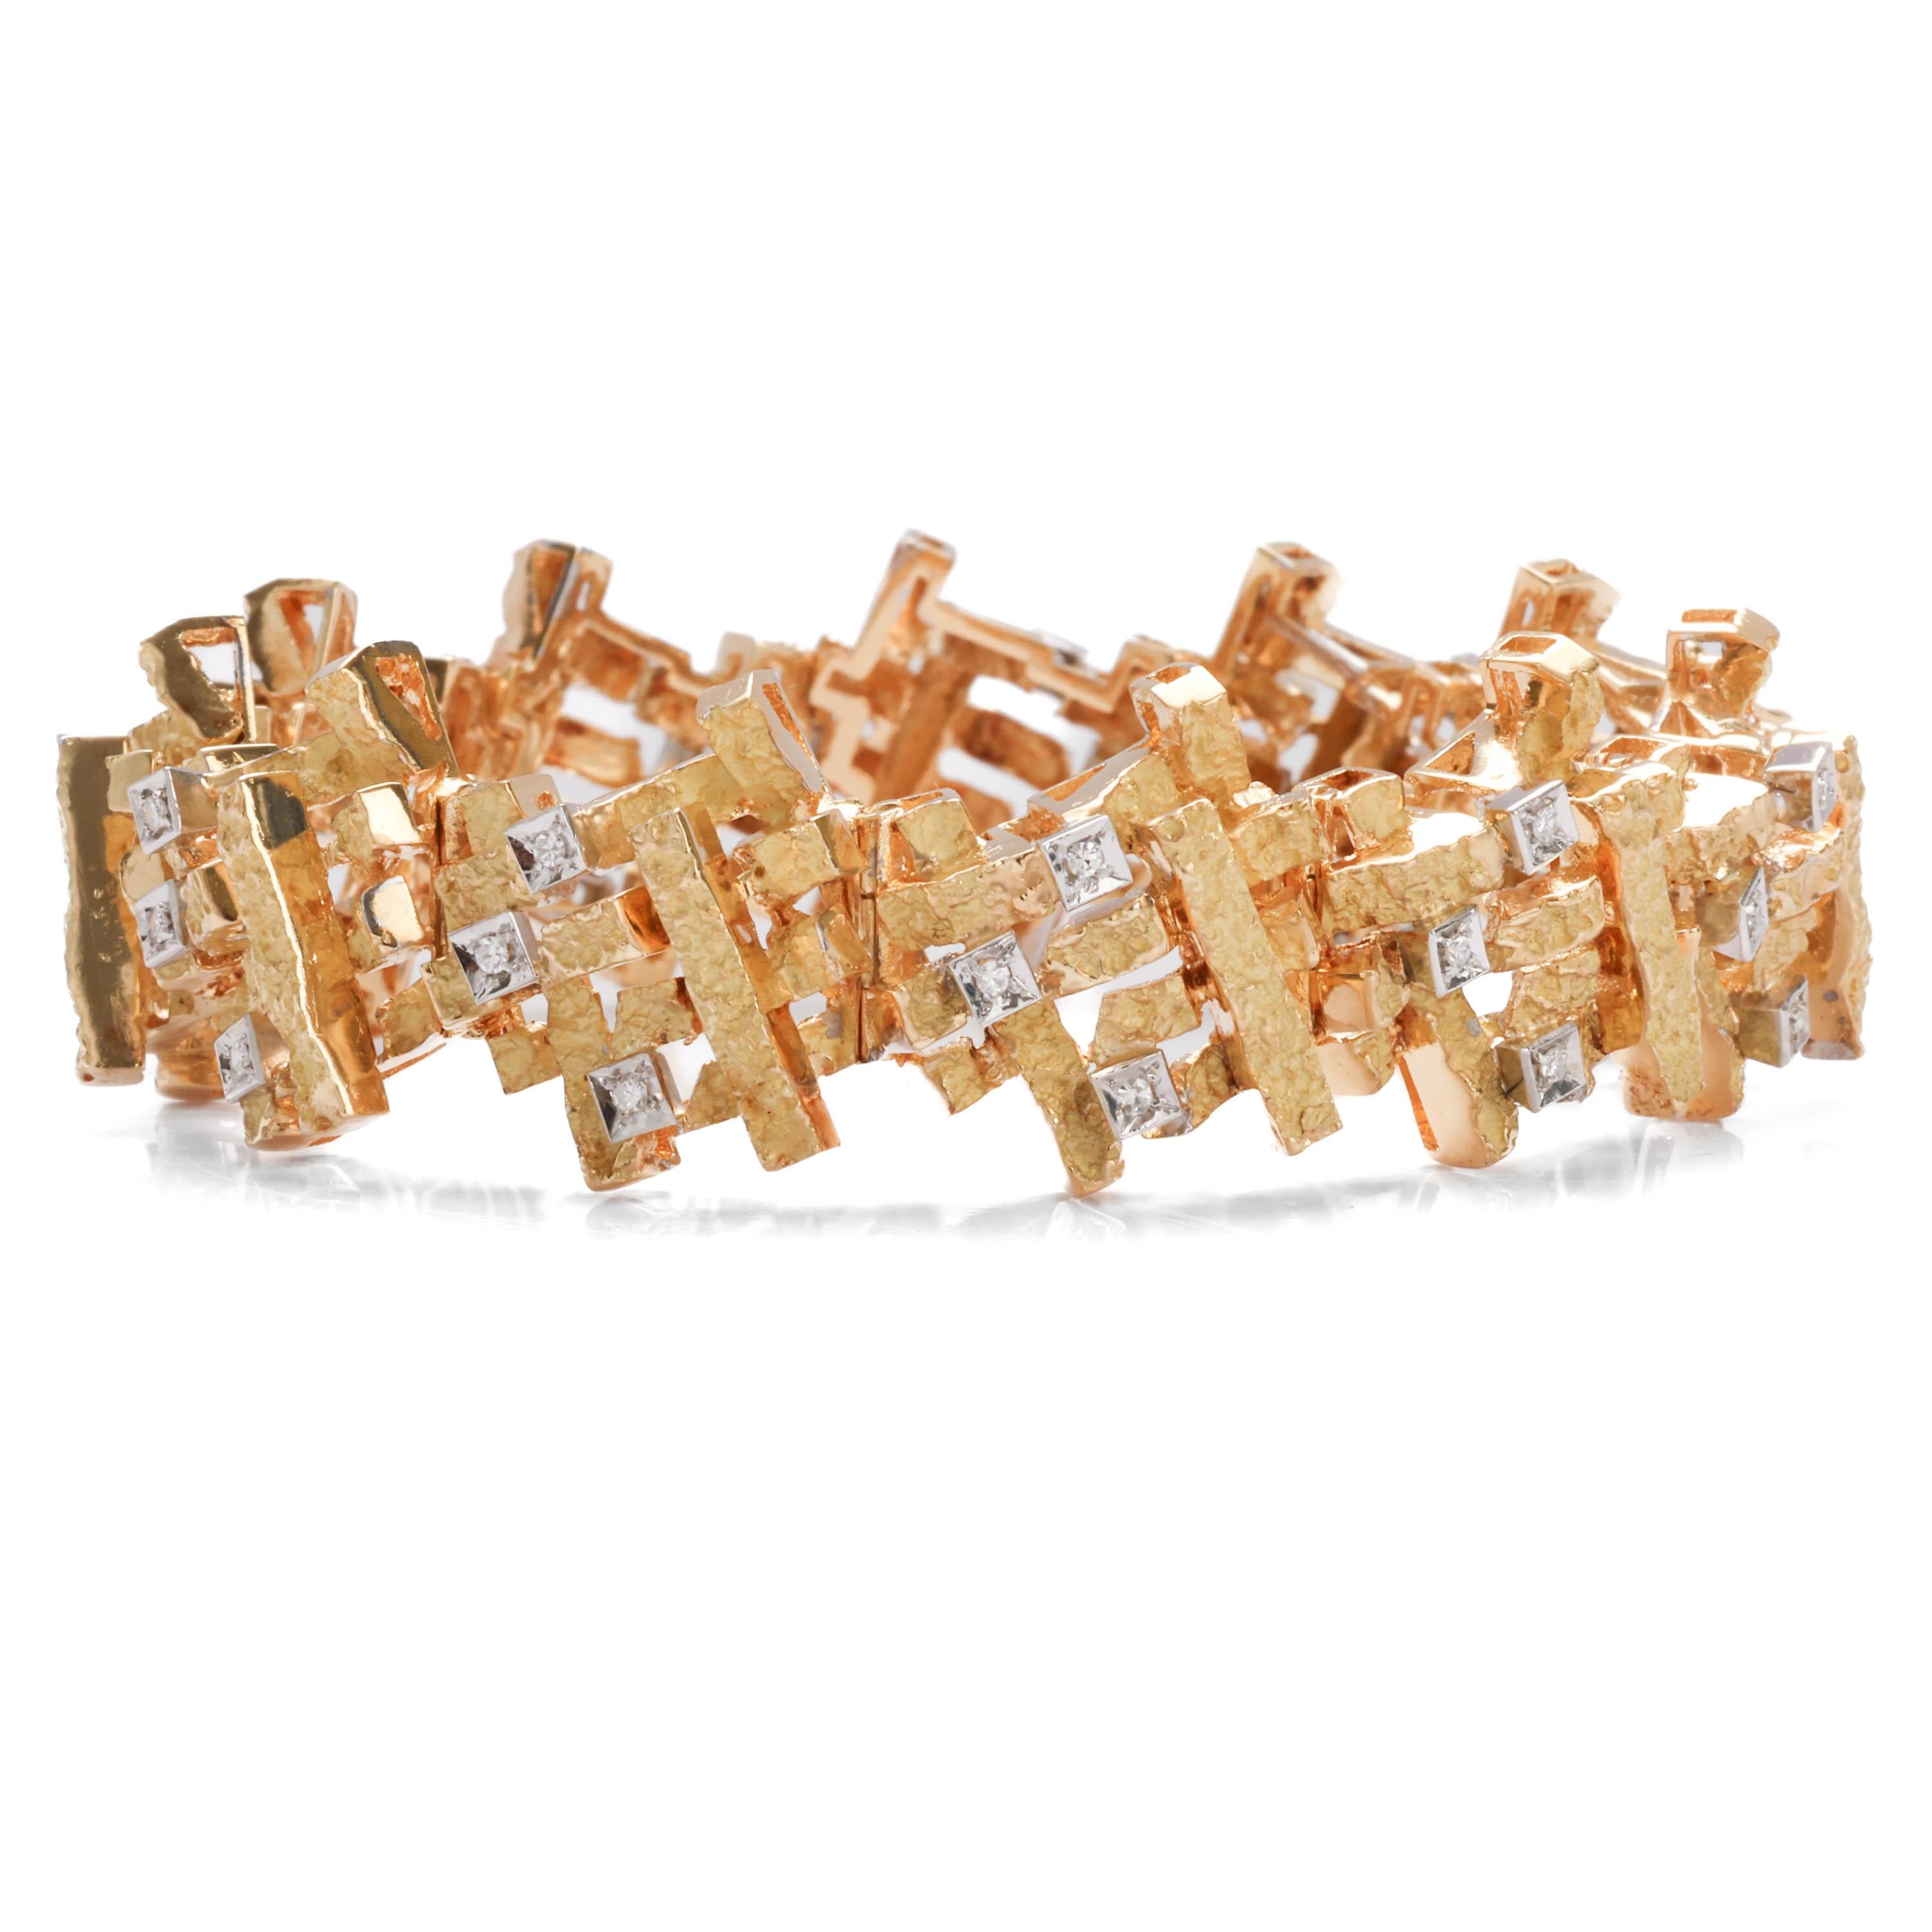 This heavy, substantial modernist bracelet was created in the middle of the previous century, most likely in the 1960s. The bracelet is constructed of rectangular lengths of hand-textured gold, 